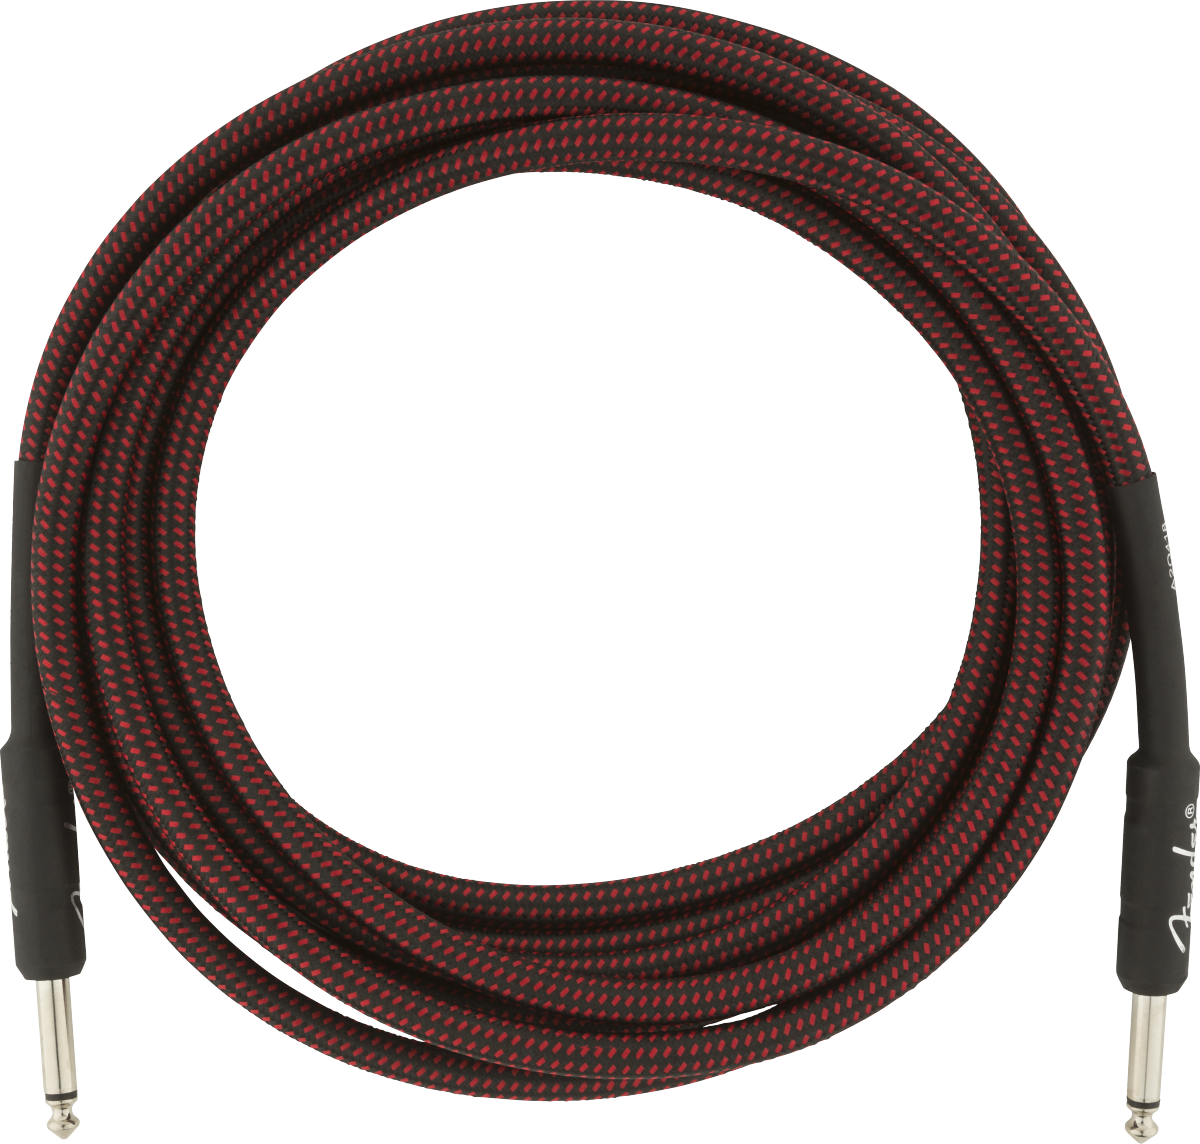 Fender Professional Series Tweed Instrument Cable 15FT - Straight to Straight - Red Tweed